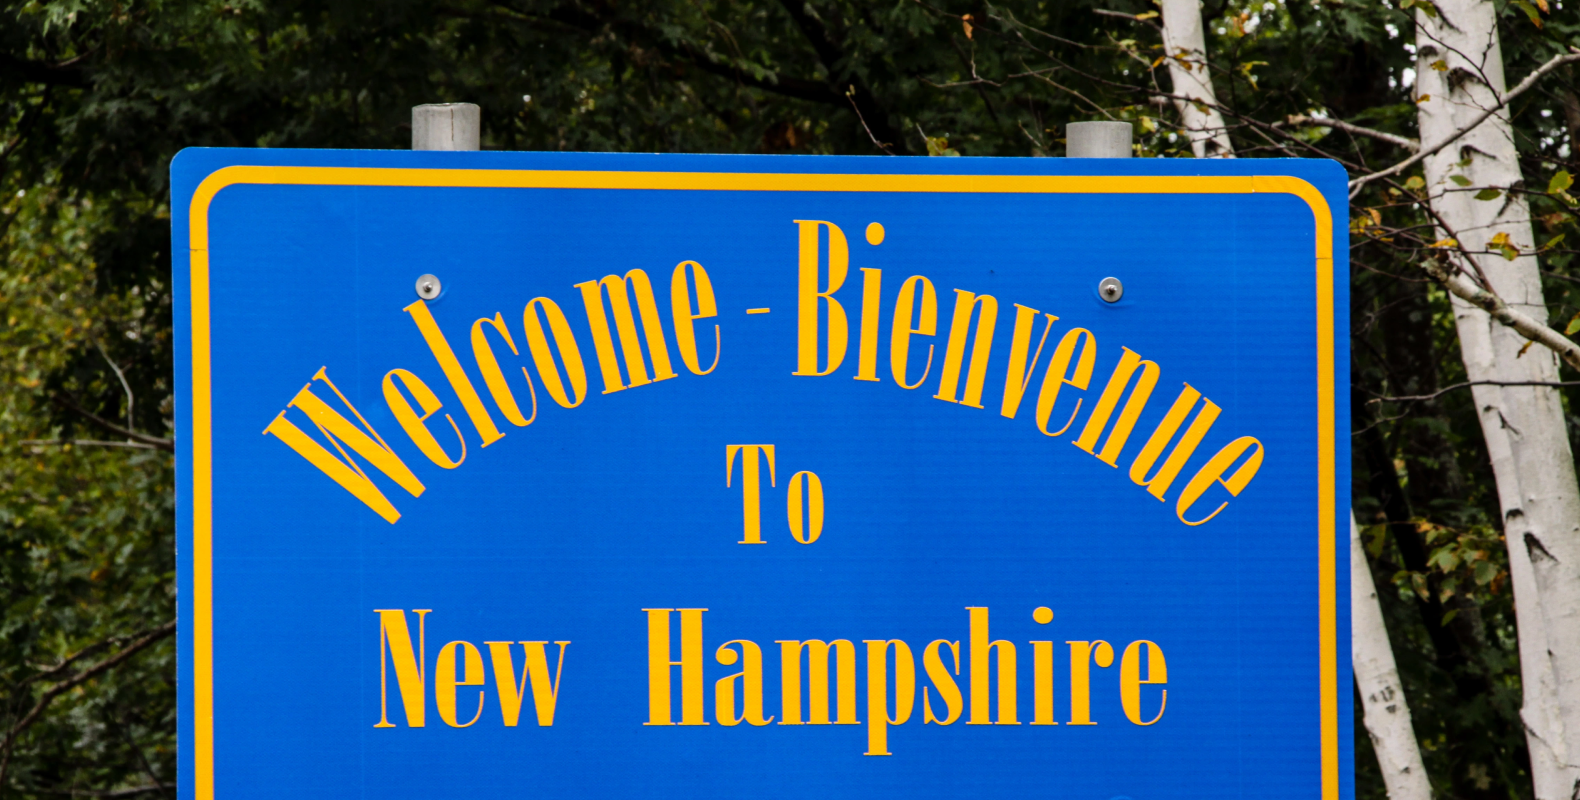 Payday Loans in New Hampshire